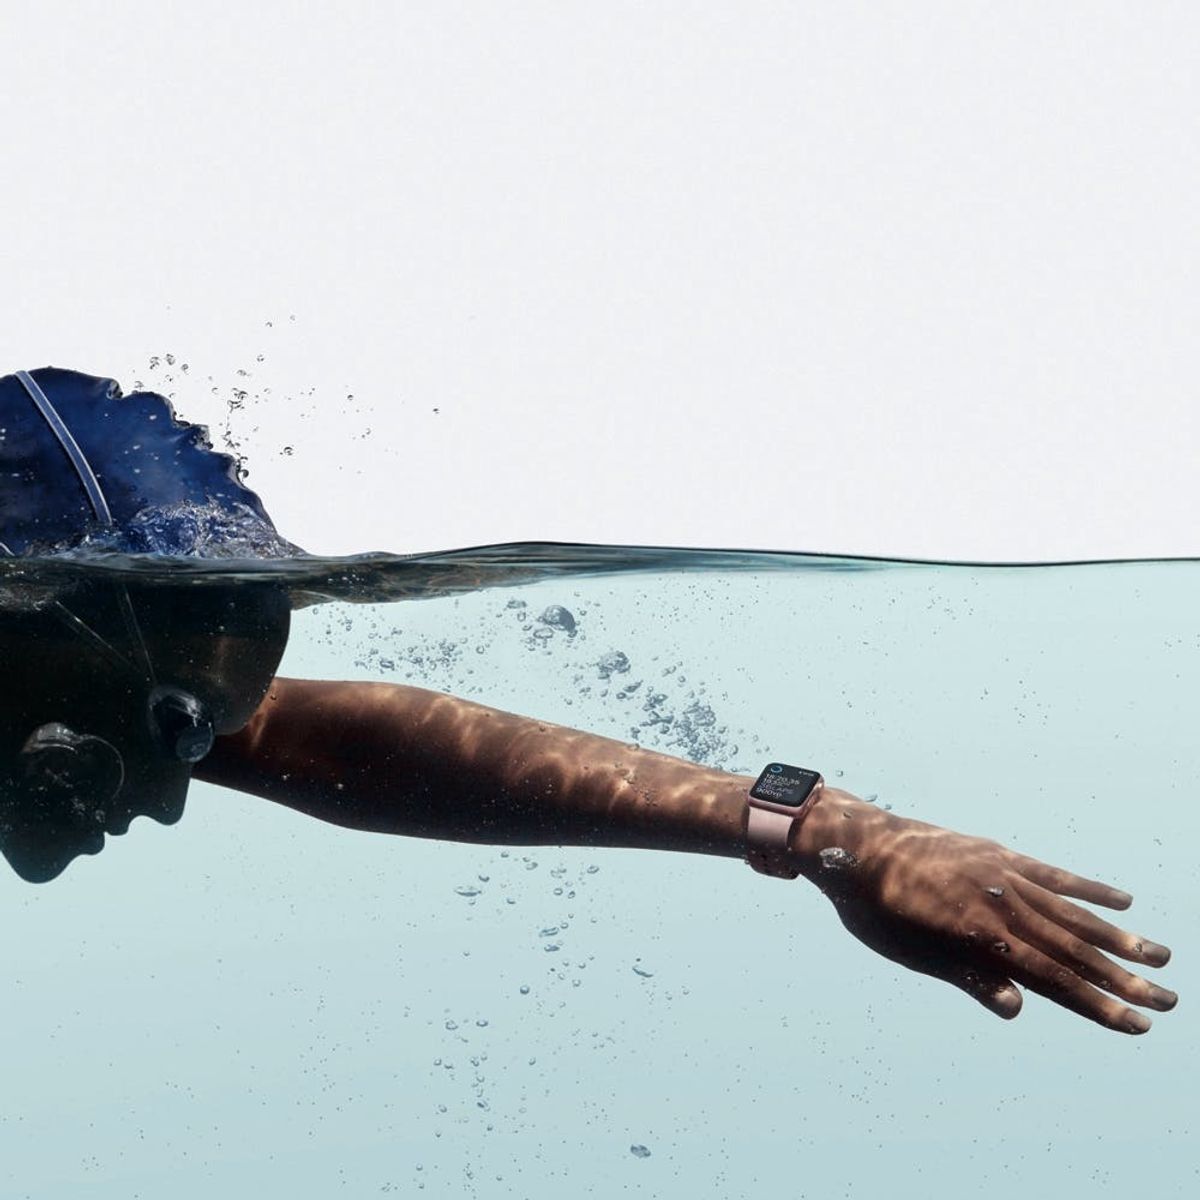 This Video of the Apple Watch Ejecting Water Is Mesmerizing